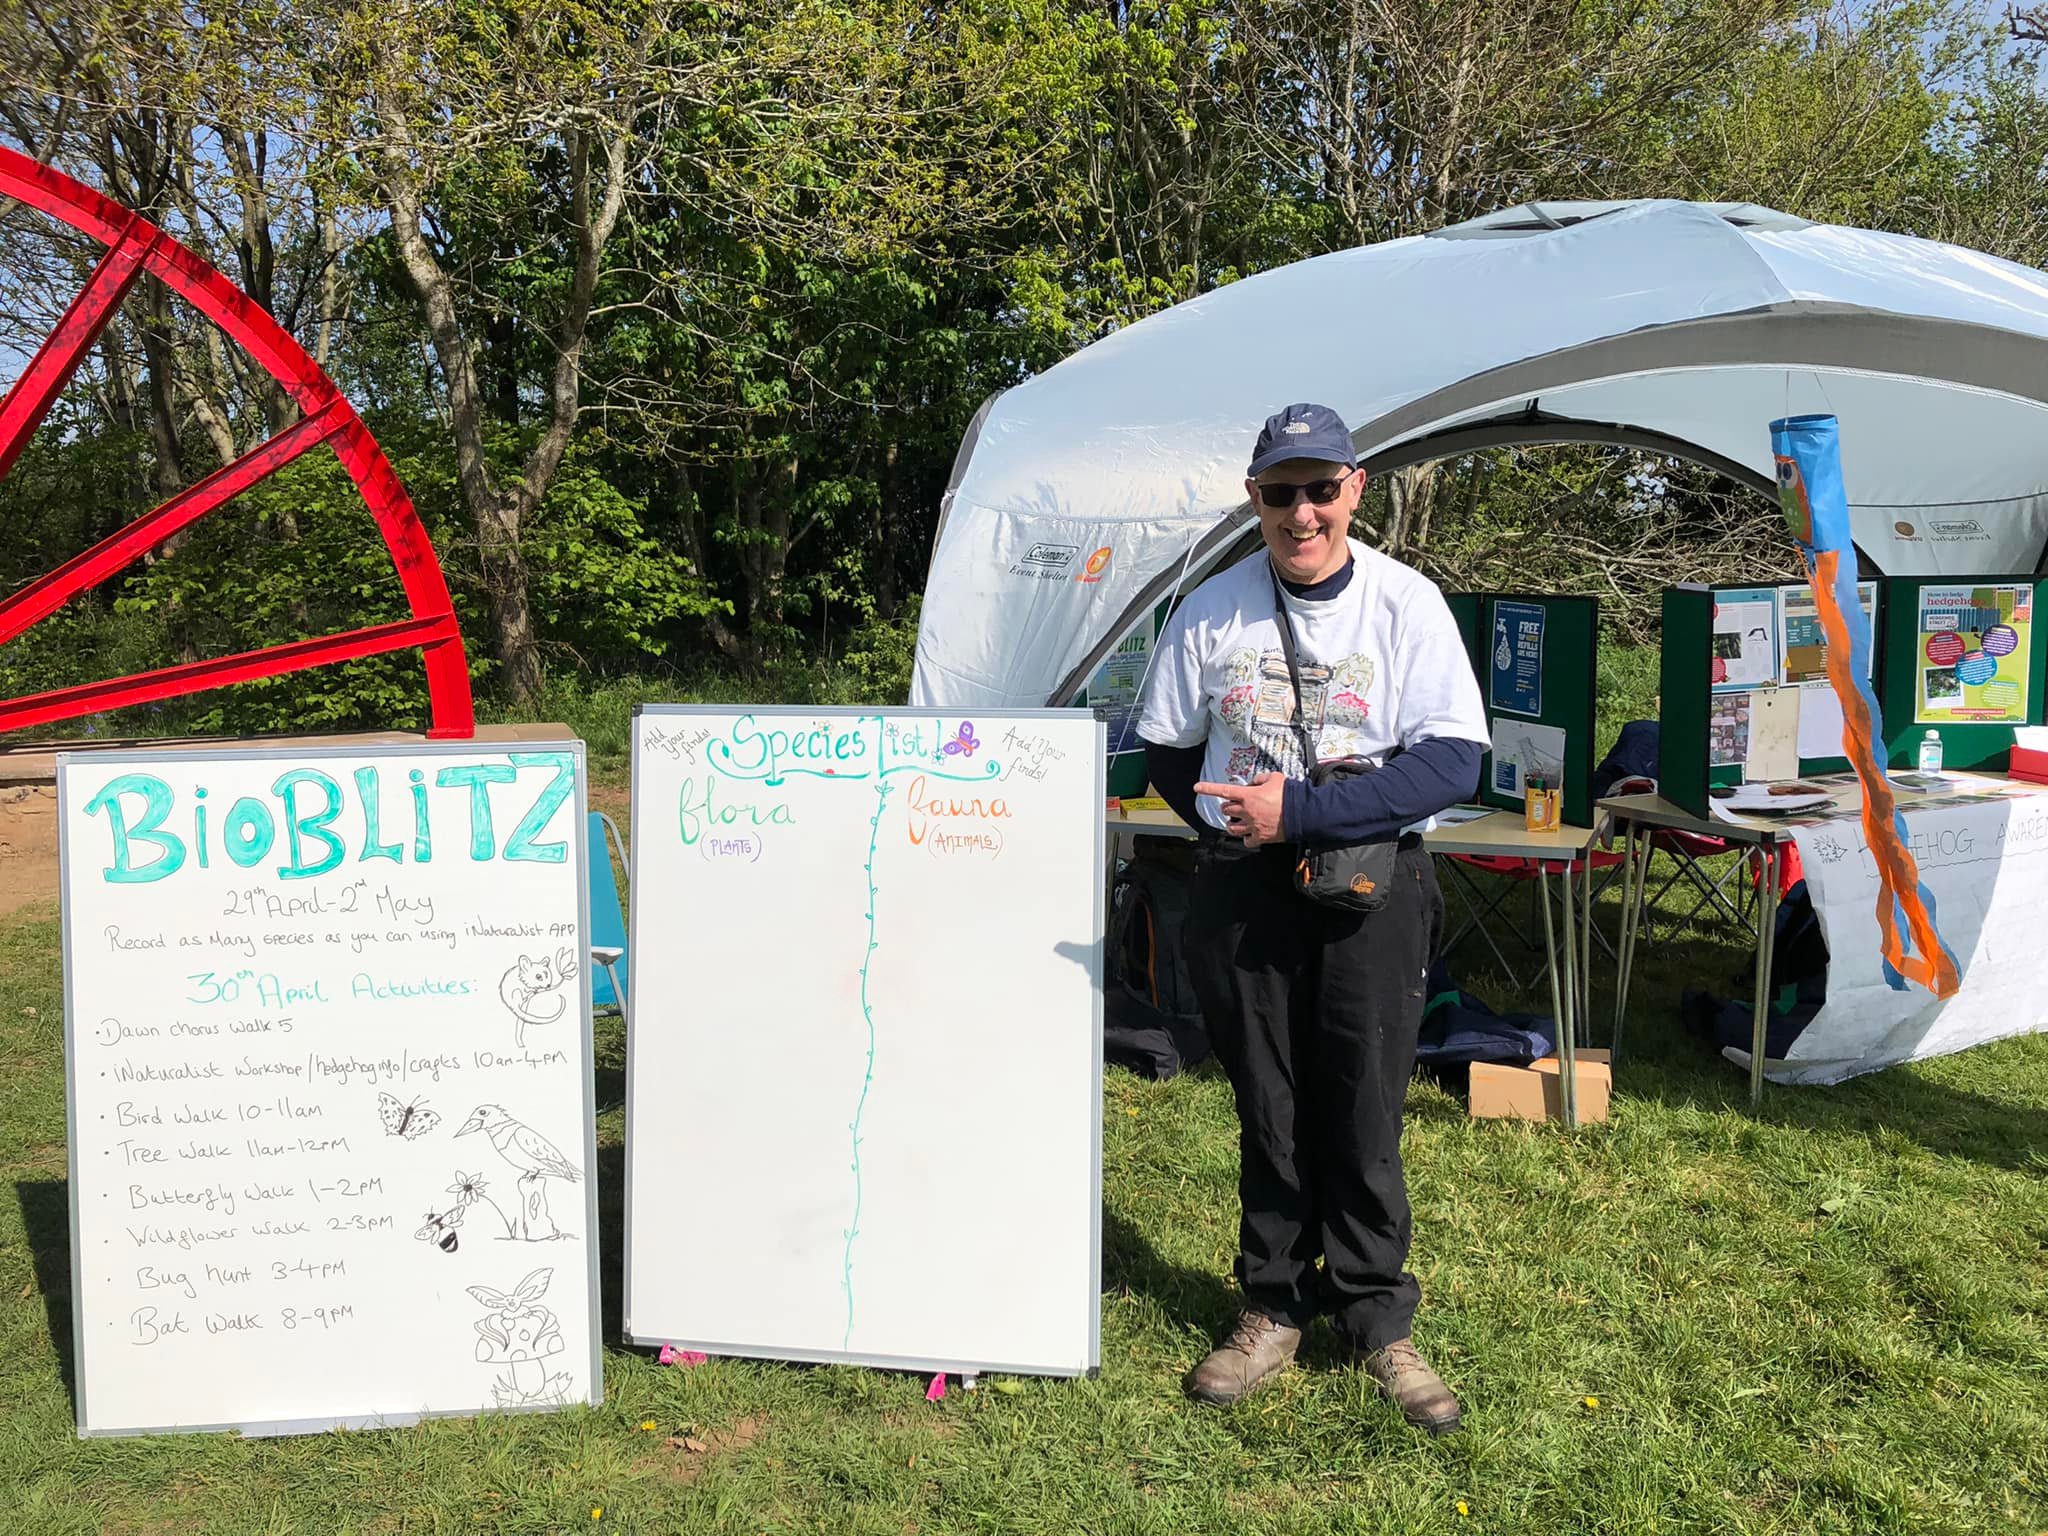 photograph of councillor Julian Selman standing in front of the Bioblitz stall, beside two white boards with Bioblitz activities listed on one, and SPECIES LIST Flora and Fauna written on the other. The day is sunny, and the Centenary wheel can be seen to the left edge. 